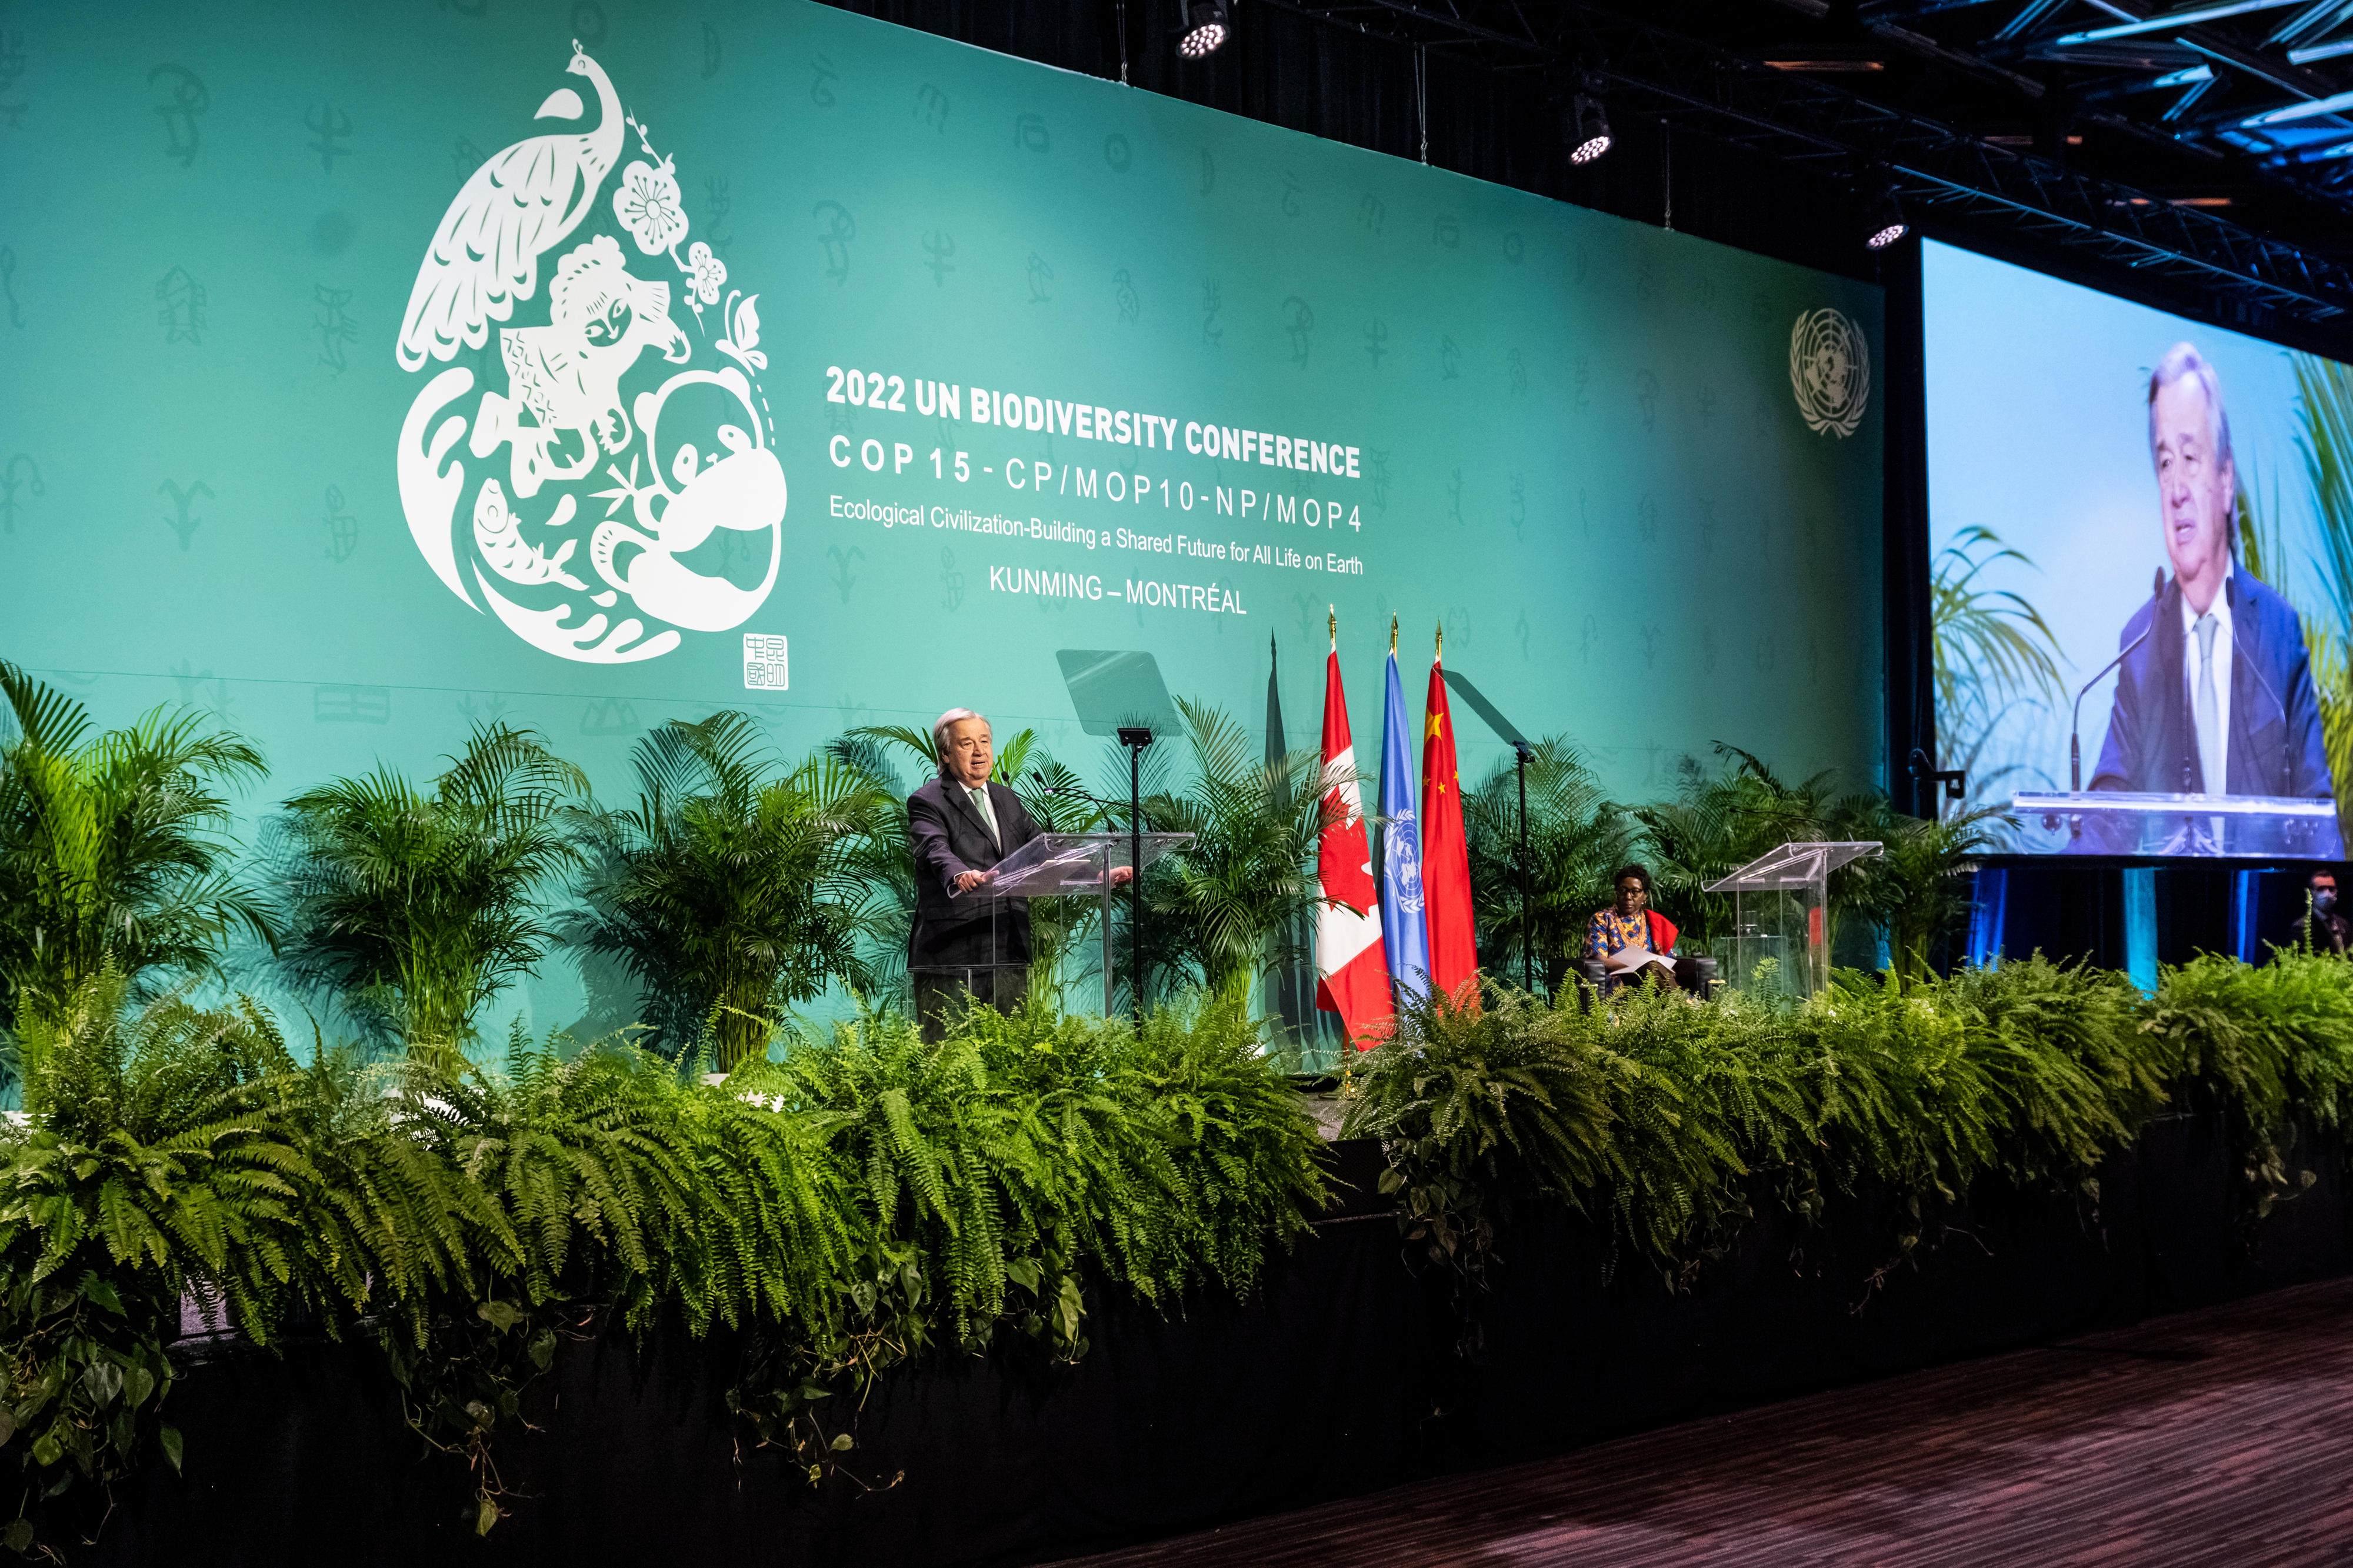 UN Secretary-General António Guterres during his speech at the opening ceremony of the 15th UN Biodiversity Conference (COP15) in Montreal, Canada